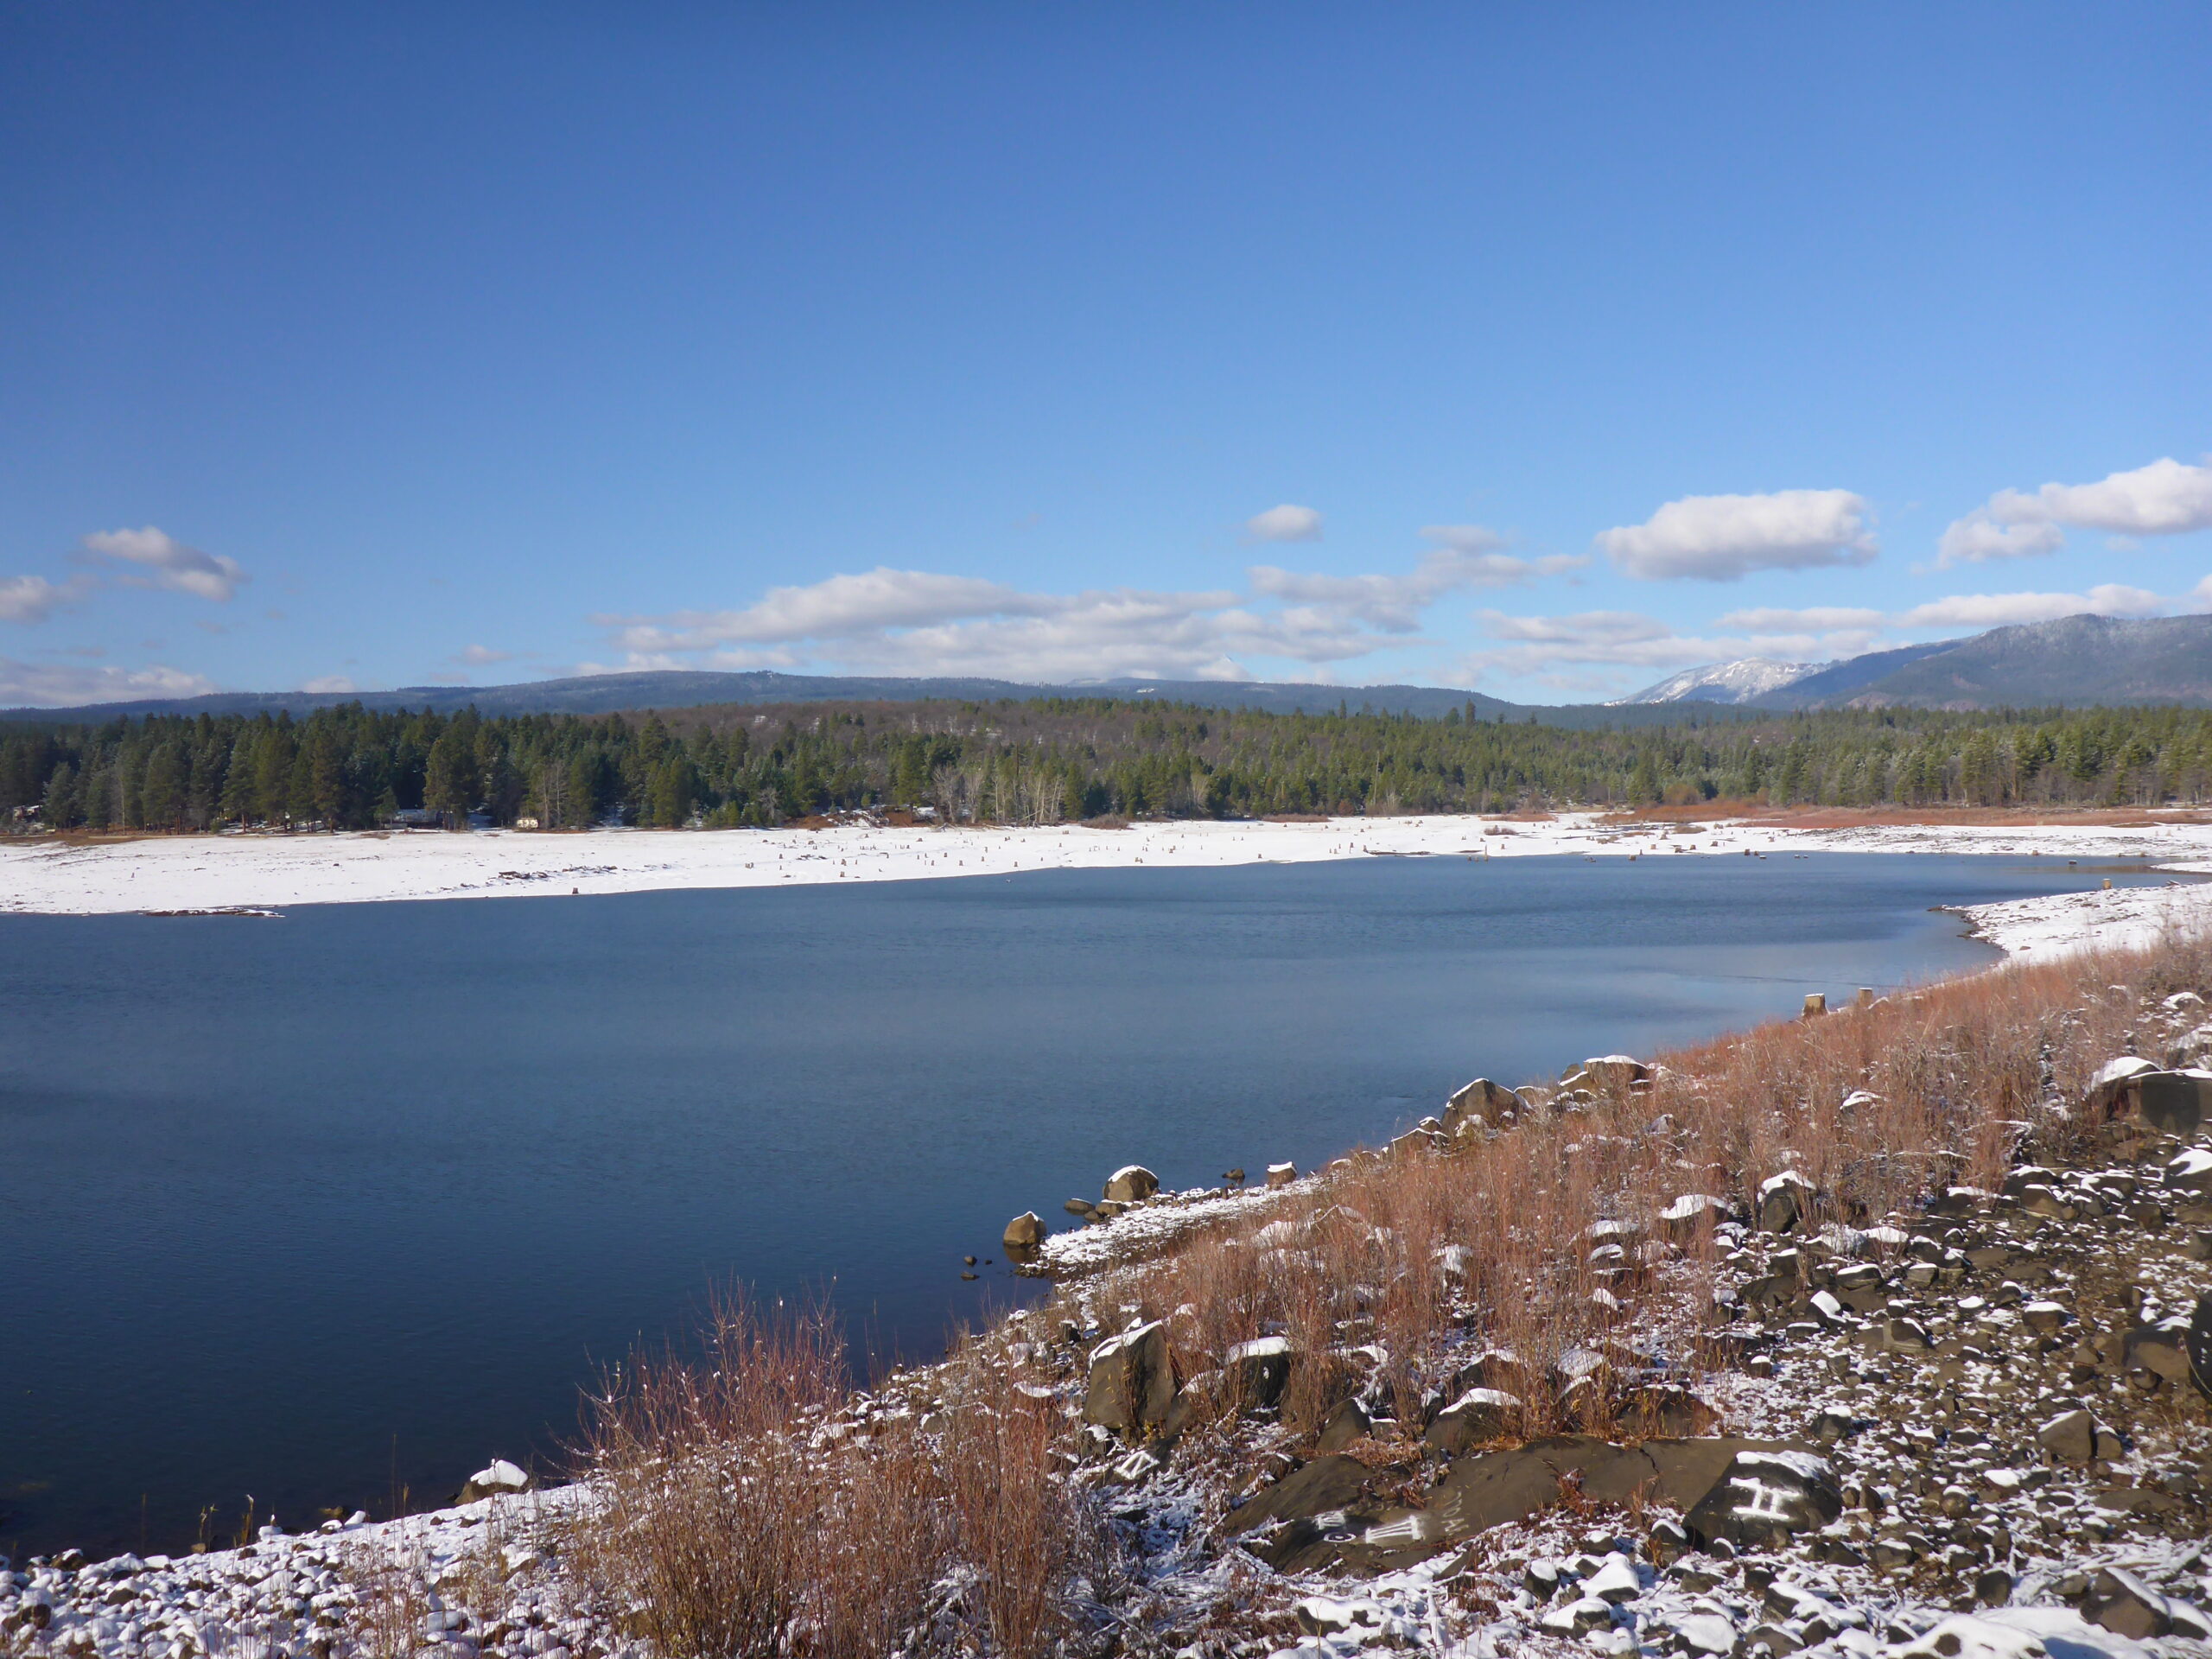 This is an wideview of Rock Creek Reservoir with the Rocky Timber Sale in the background. The shores of the reservoir is covered in snow and the sky is a deep blue color.